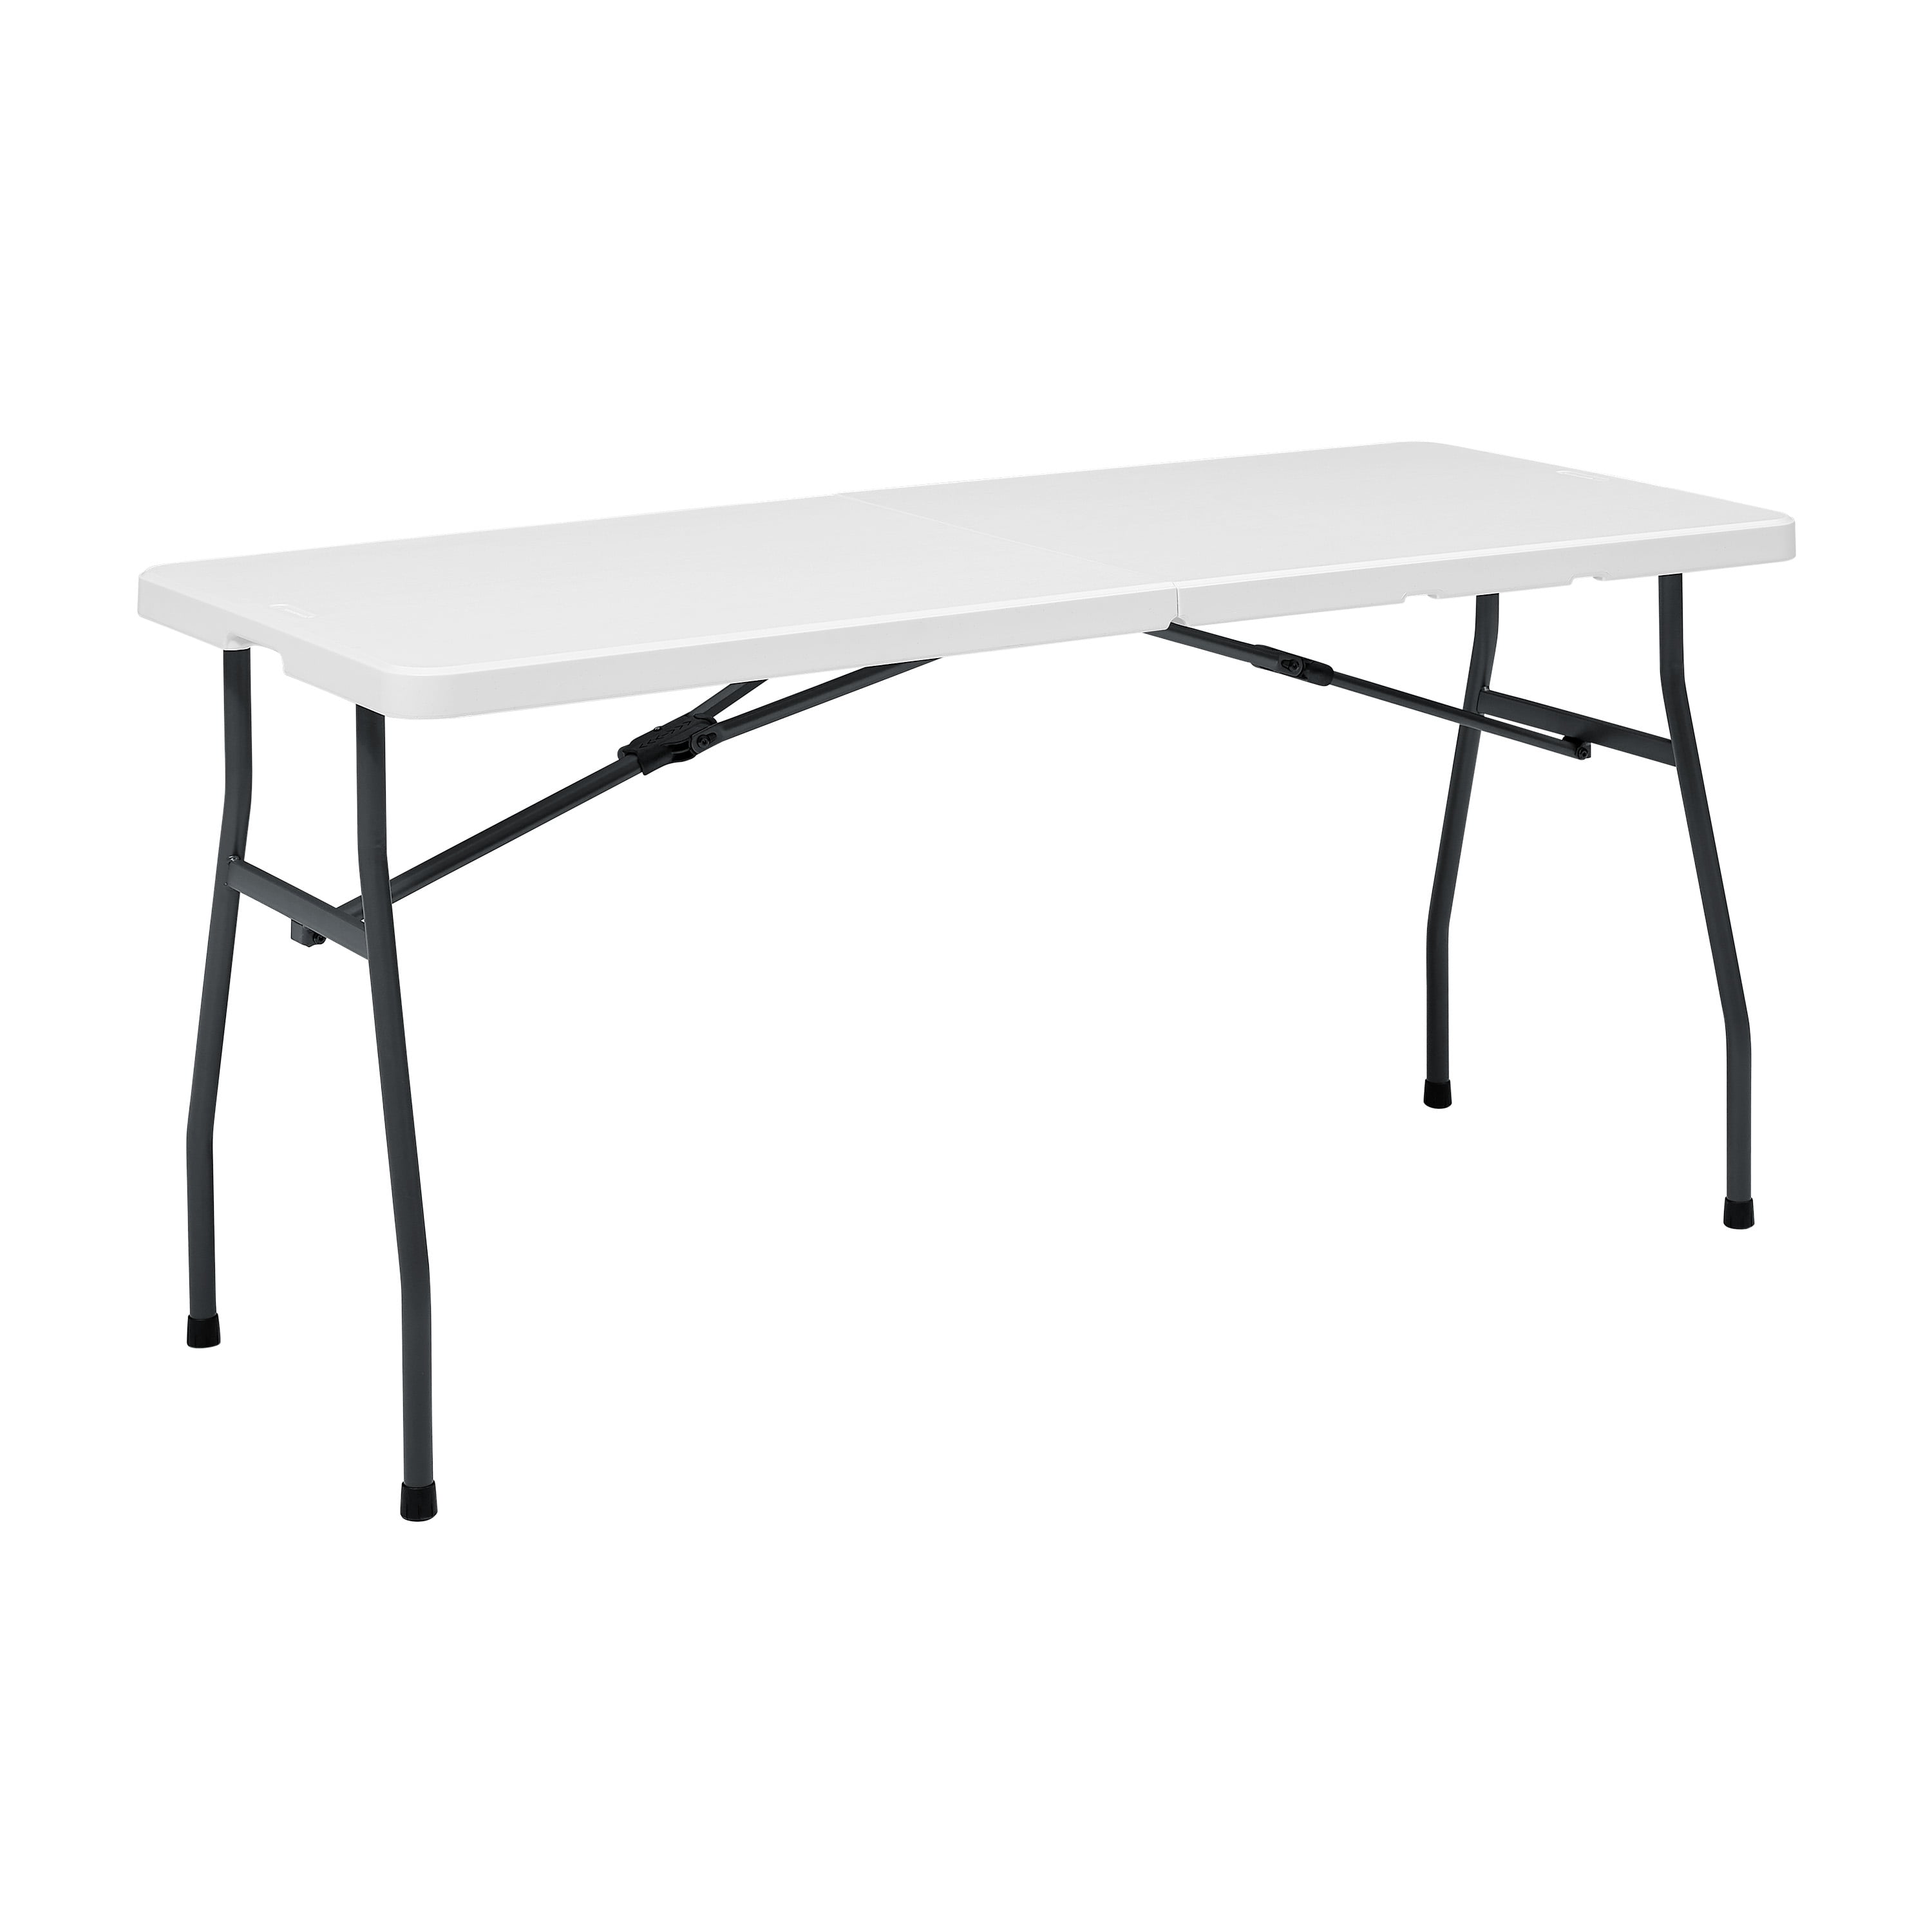 Ozark Trail 5 Foot Folding Table for Indoor/Outdoor, White, 60.5 in x 25.5 in x 29 in